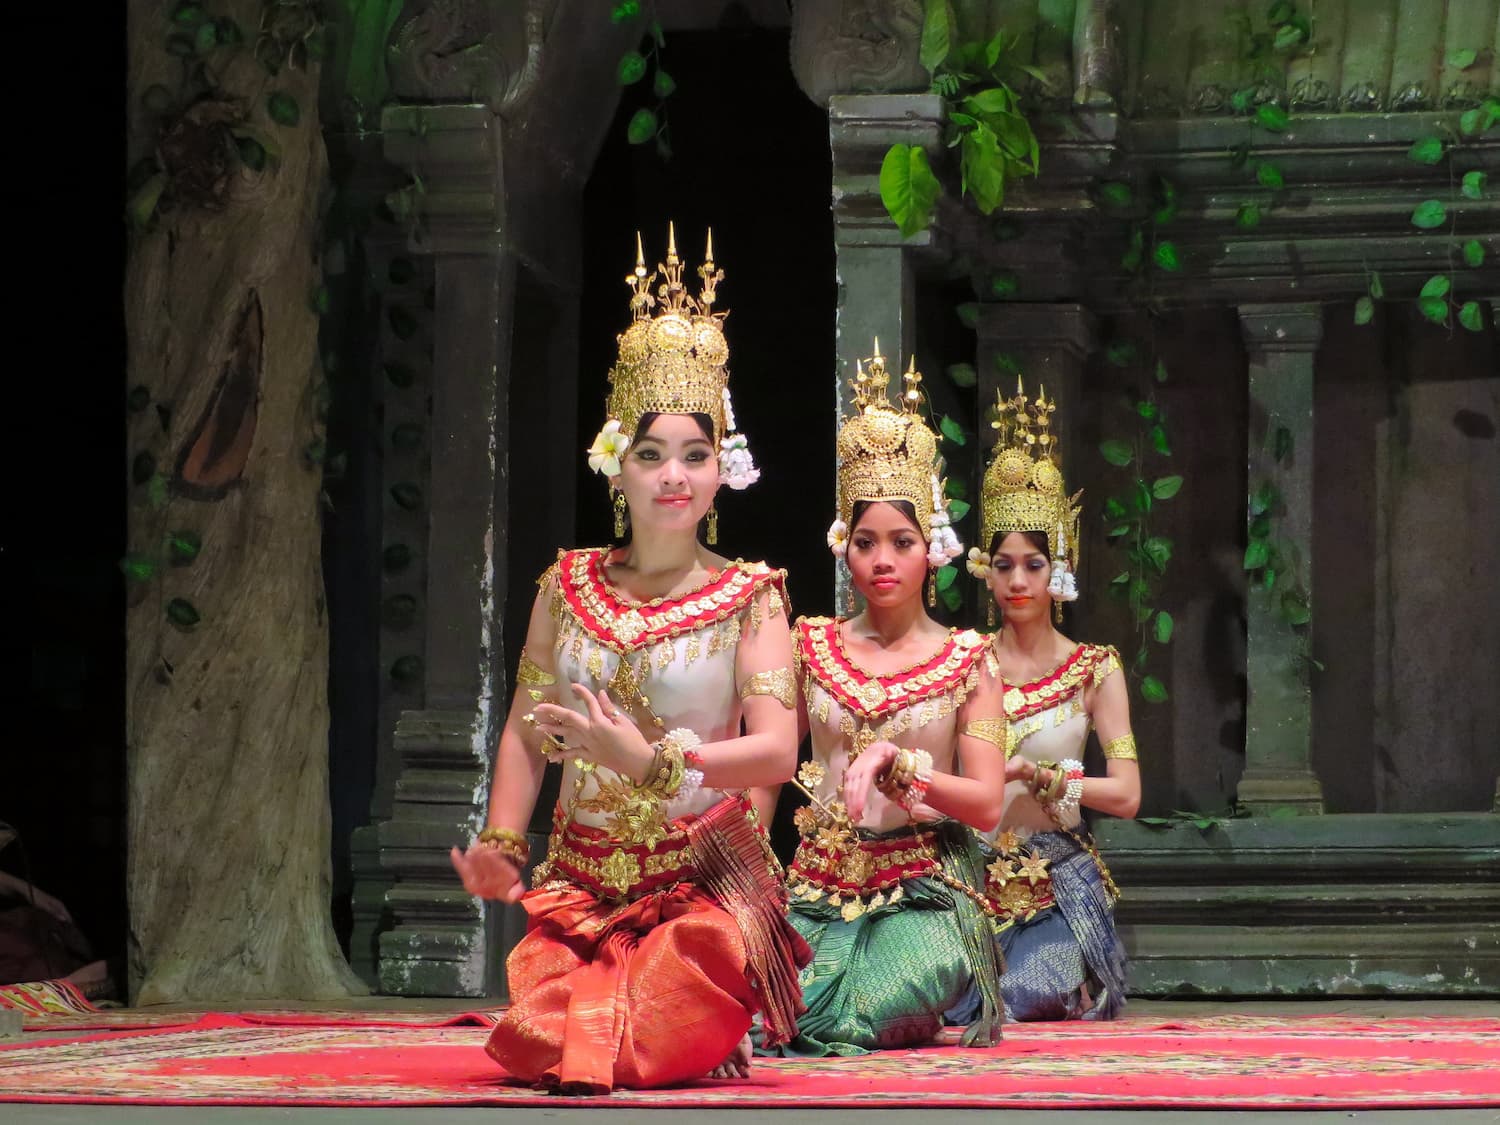 Cambodian heritage and culture